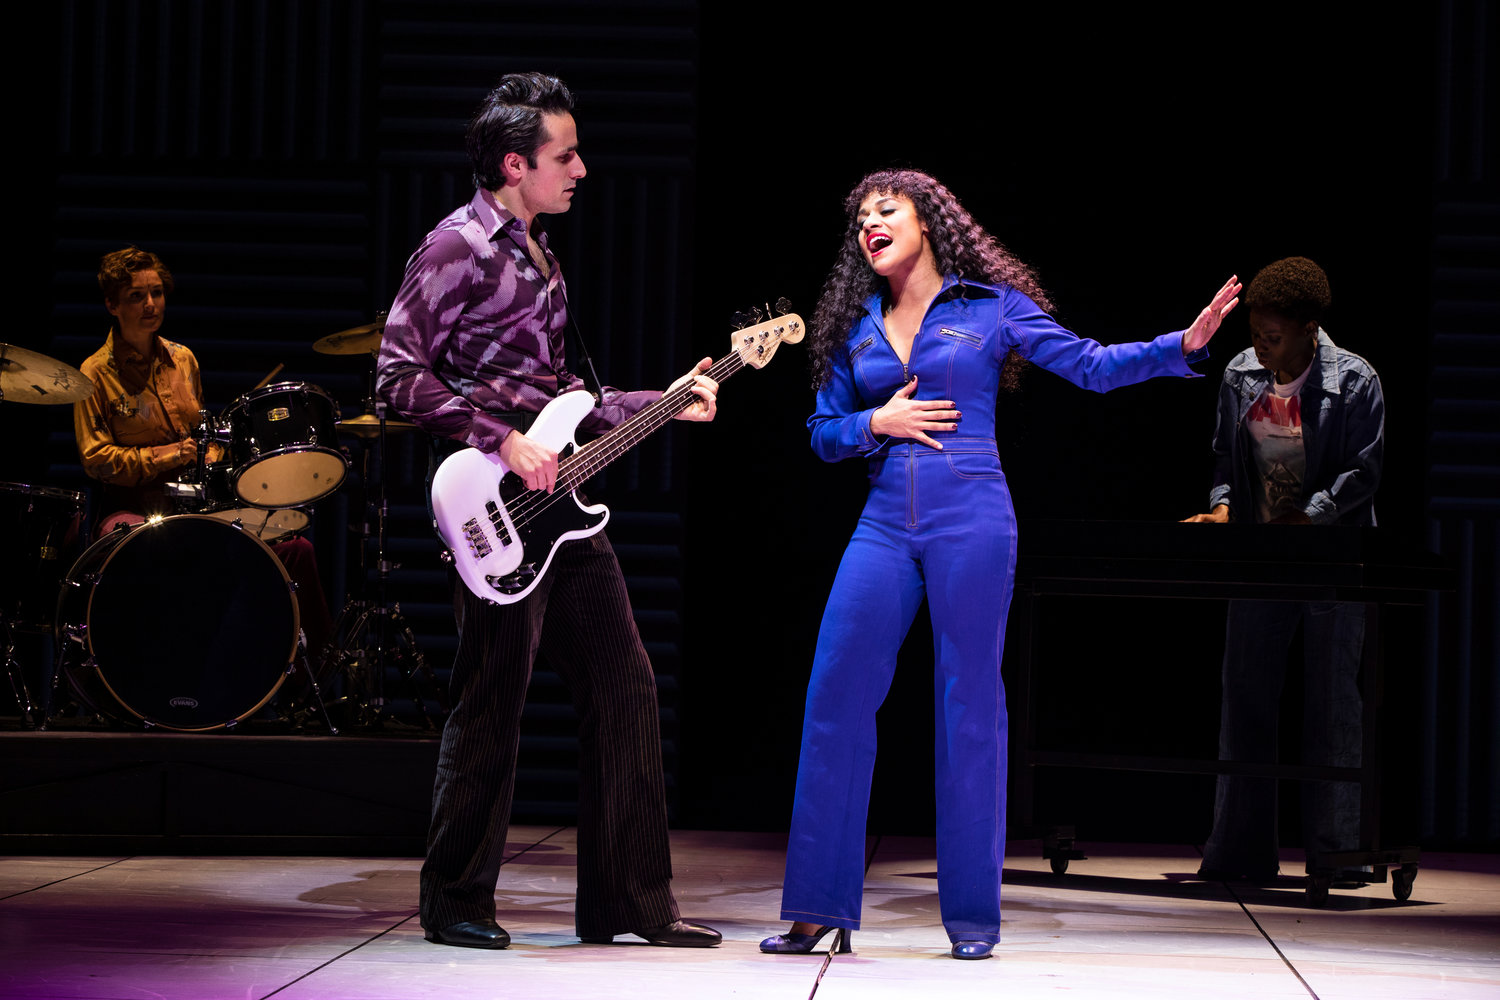 Jared Zirilli, left, starred in Broadway’s “Summer: The Donna Summer Musical” at the Lunt-Fontanne Theatre in New York City. These days he is working as an acting coach, after pandemic-related theater closures forced the industry to shut down.